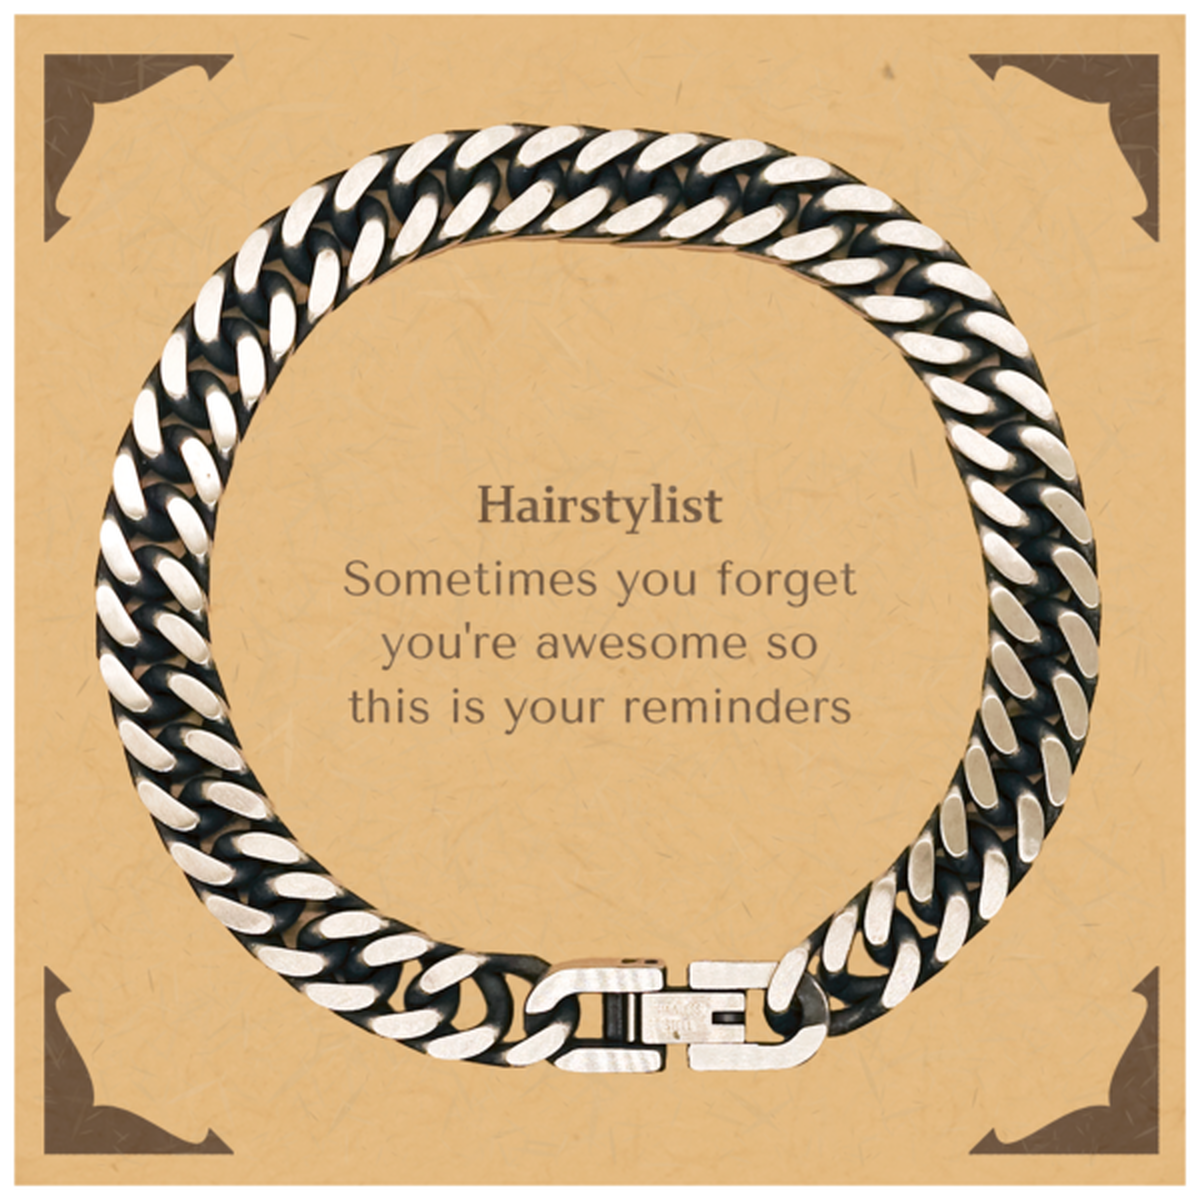 Sentimental Hairstylist Cuban Link Chain Bracelet, Hairstylist Sometimes you forget you're awesome so this is your reminders, Graduation Christmas Birthday Gifts for Hairstylist, Men, Women, Coworkers